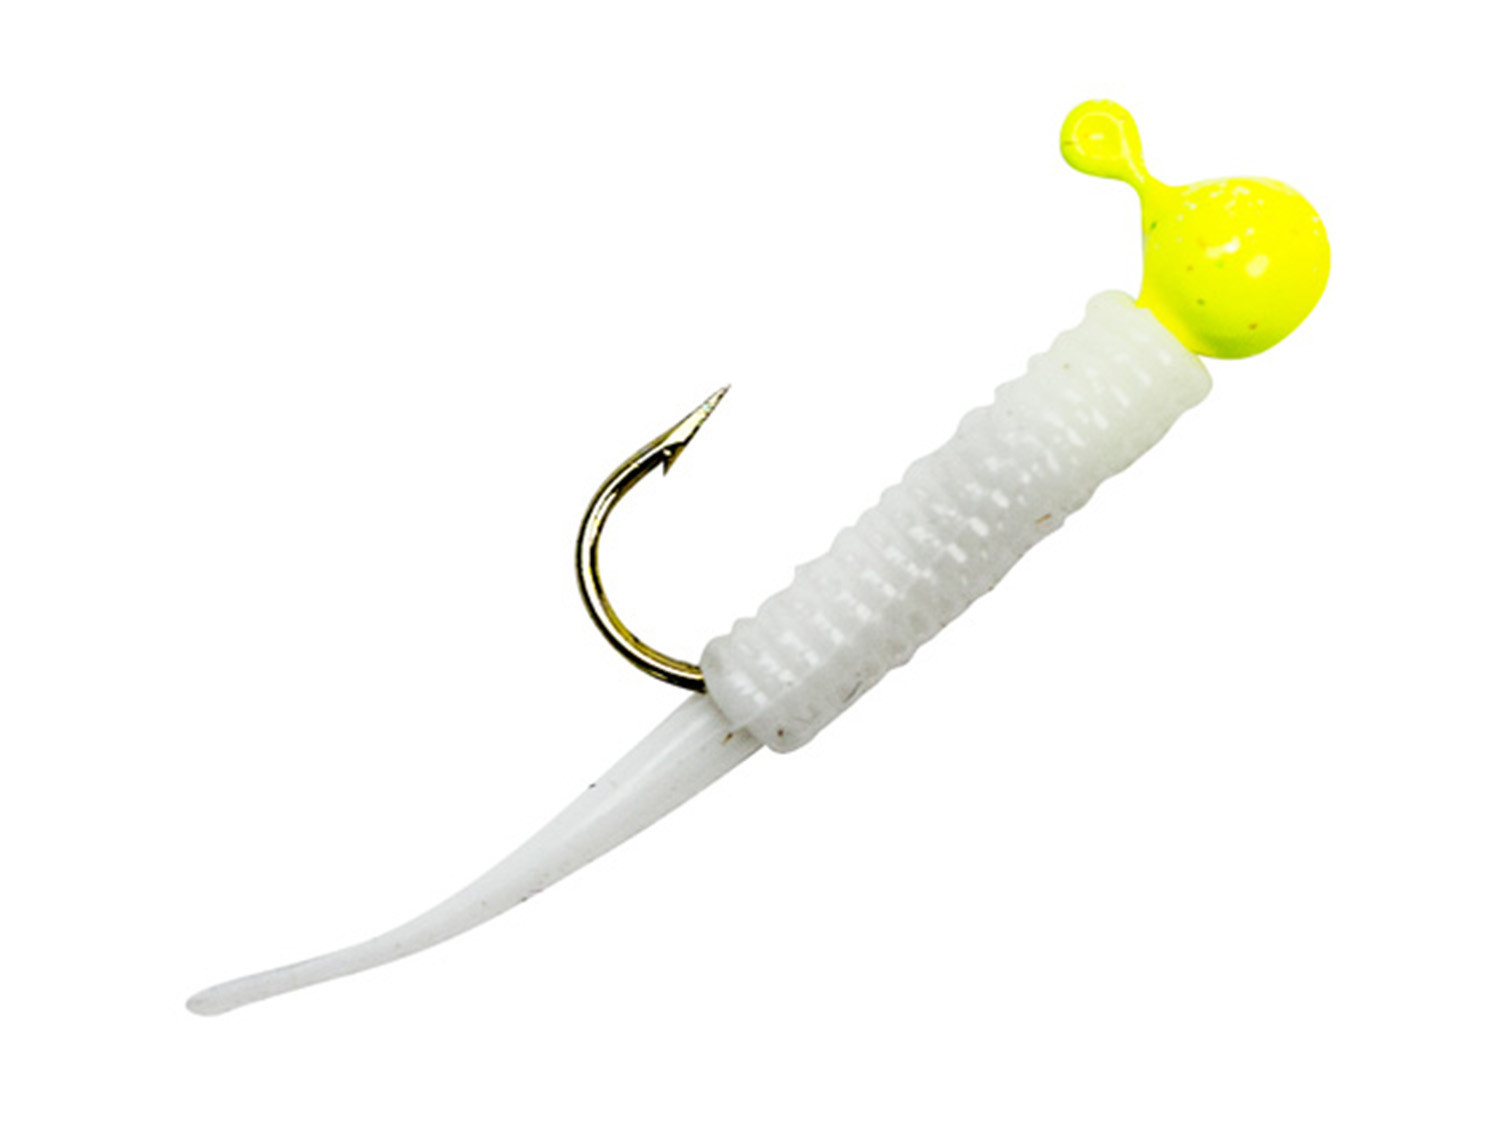 K & E Tackle Whip'r Snap - Chartreuse/Chartreuse